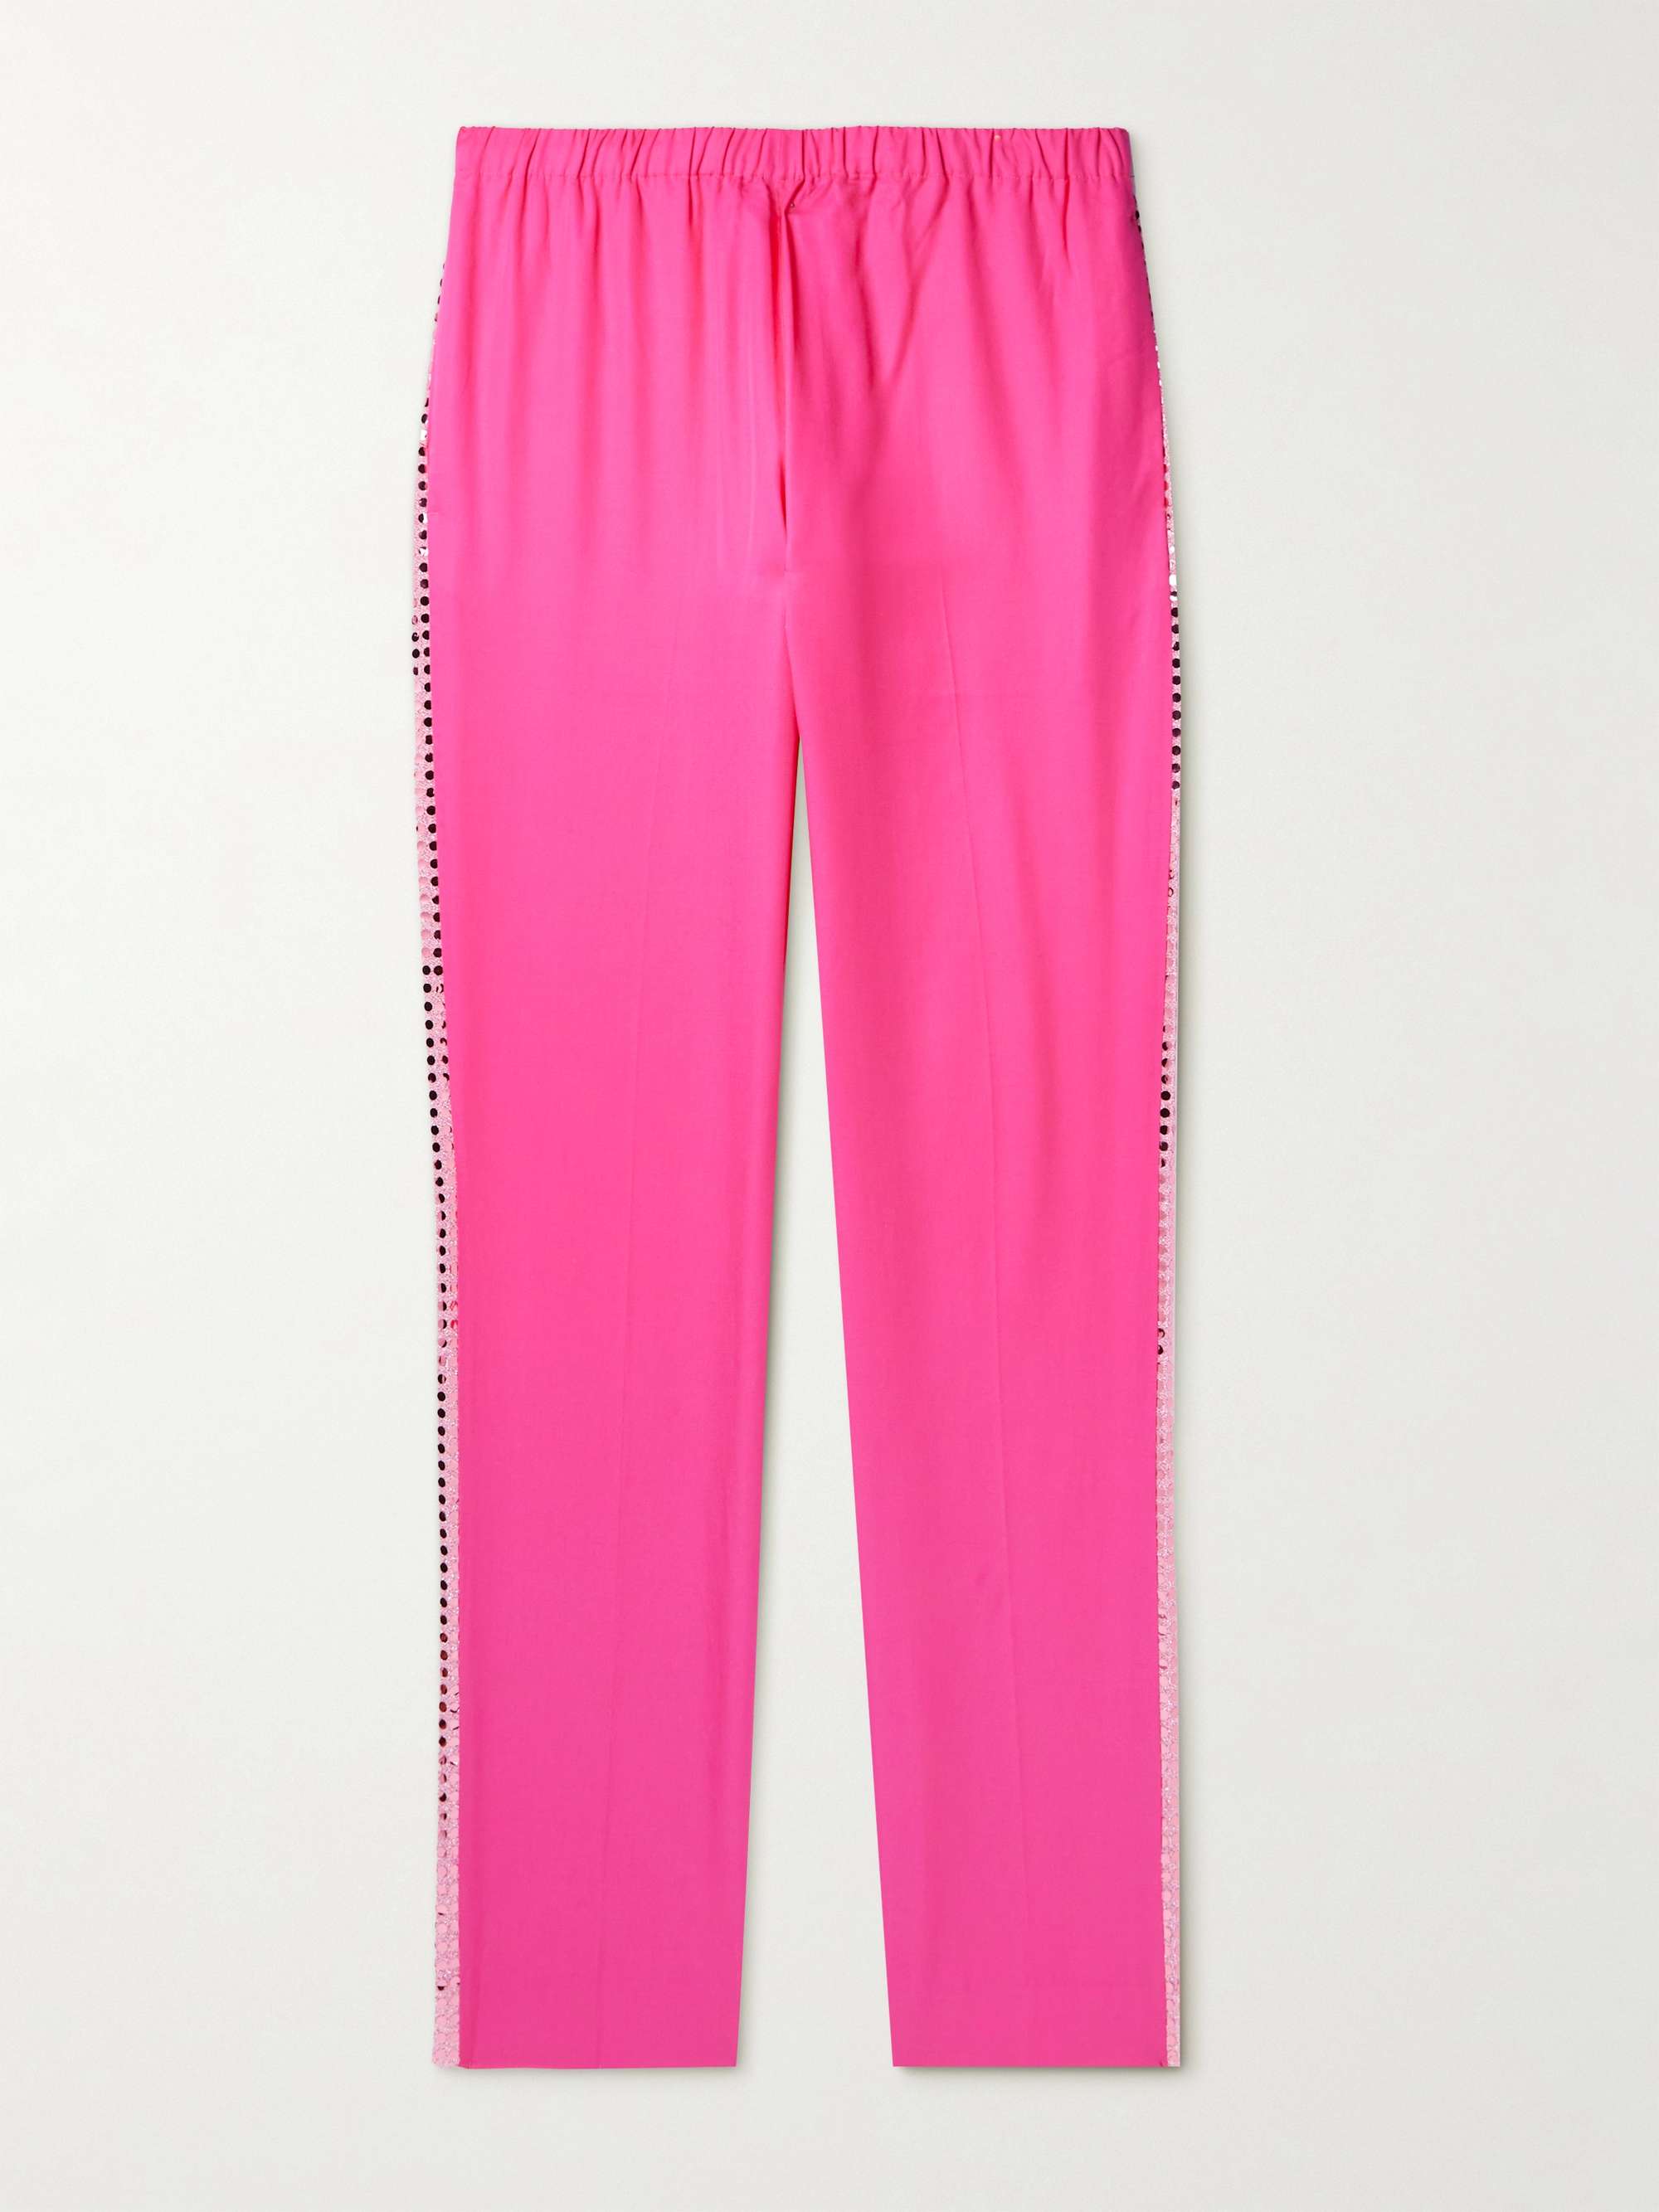 ACNE STUDIOS Tapered Sequinned Lamé-Trimmed Lyocell Trousers